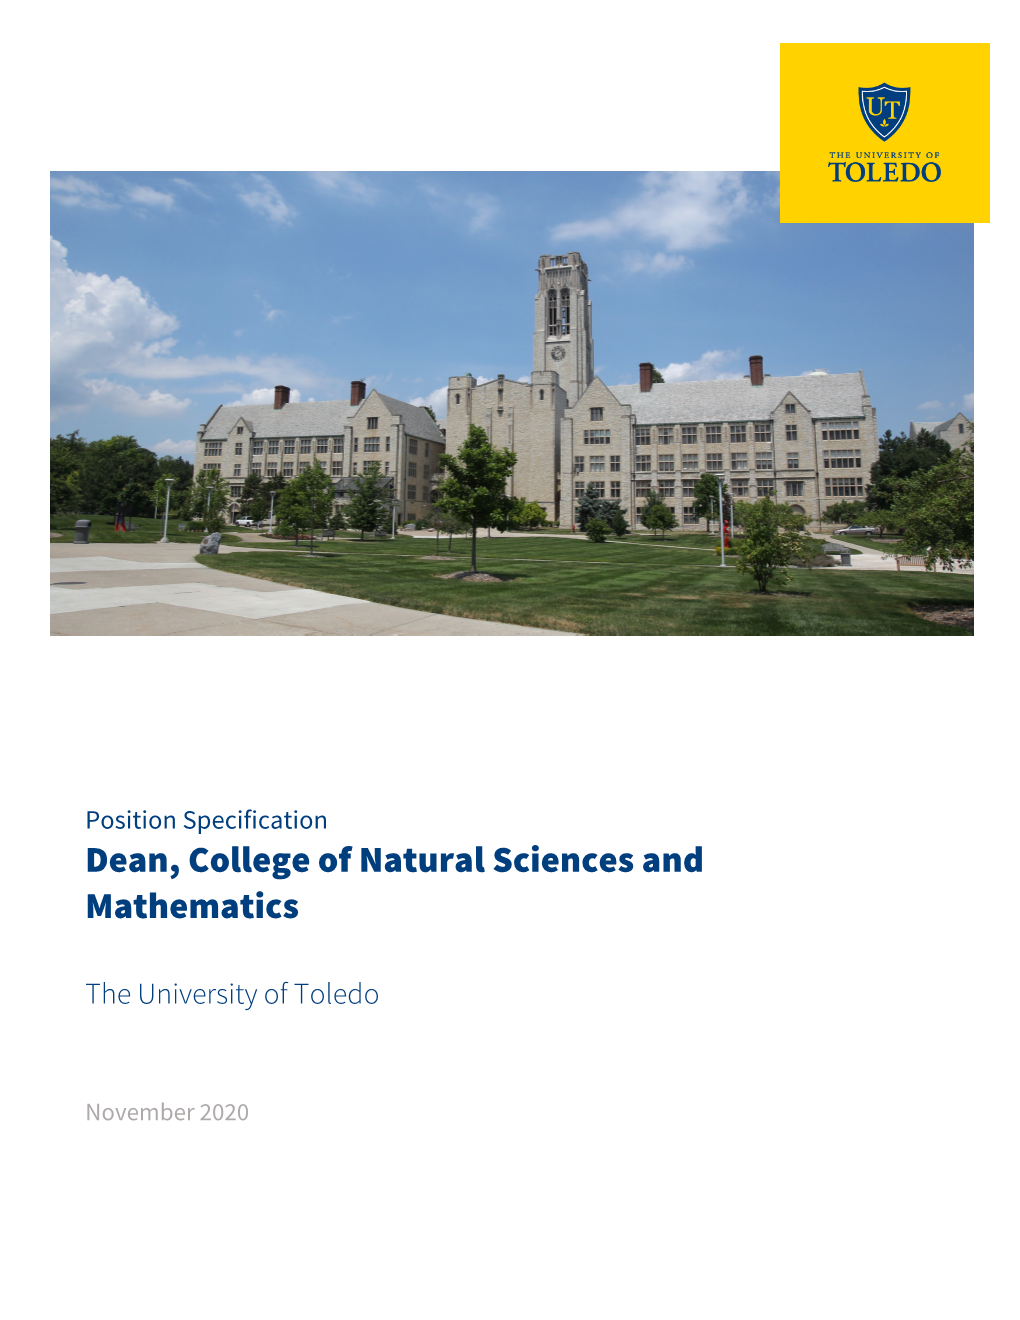 Dean, College of Natural Sciences and Mathematics